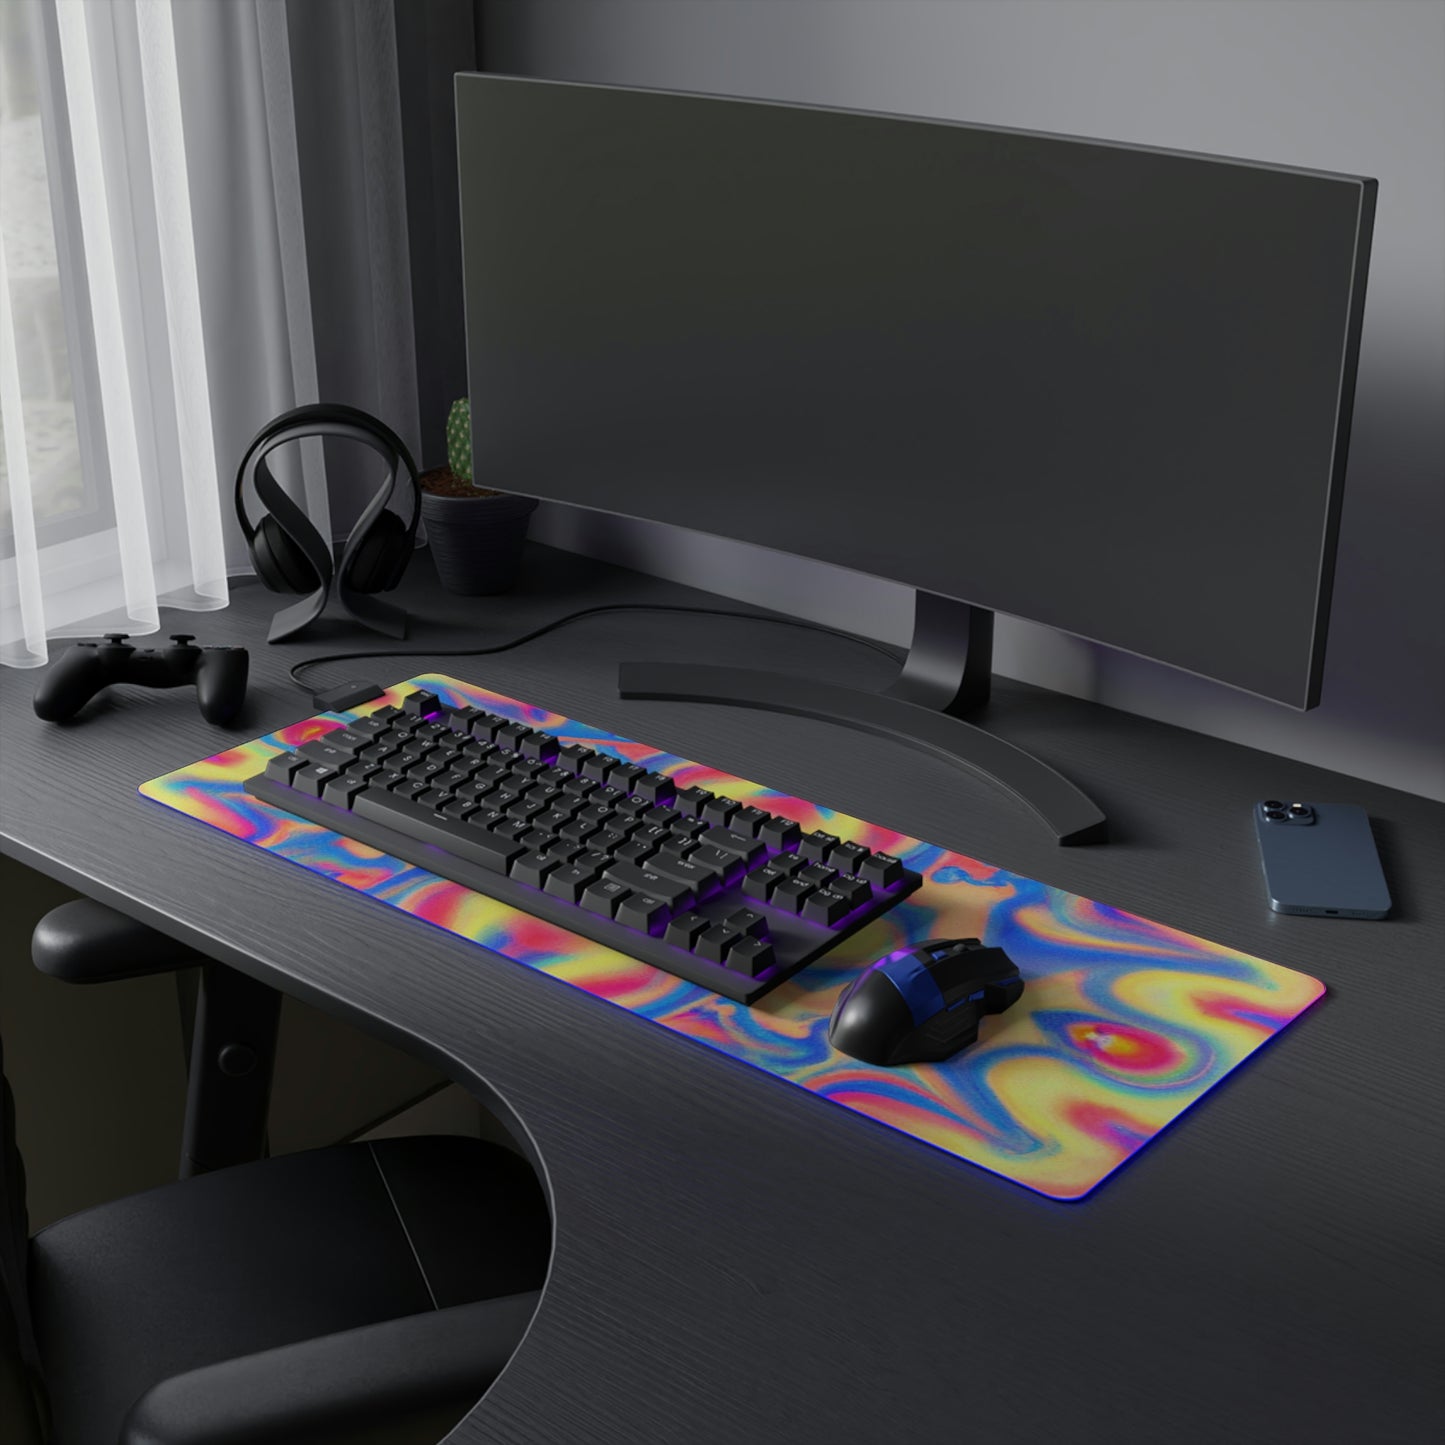 Rocky "Rocket" Rodillio - Psychedelic Trippy LED Light Up Gaming Mouse Pad